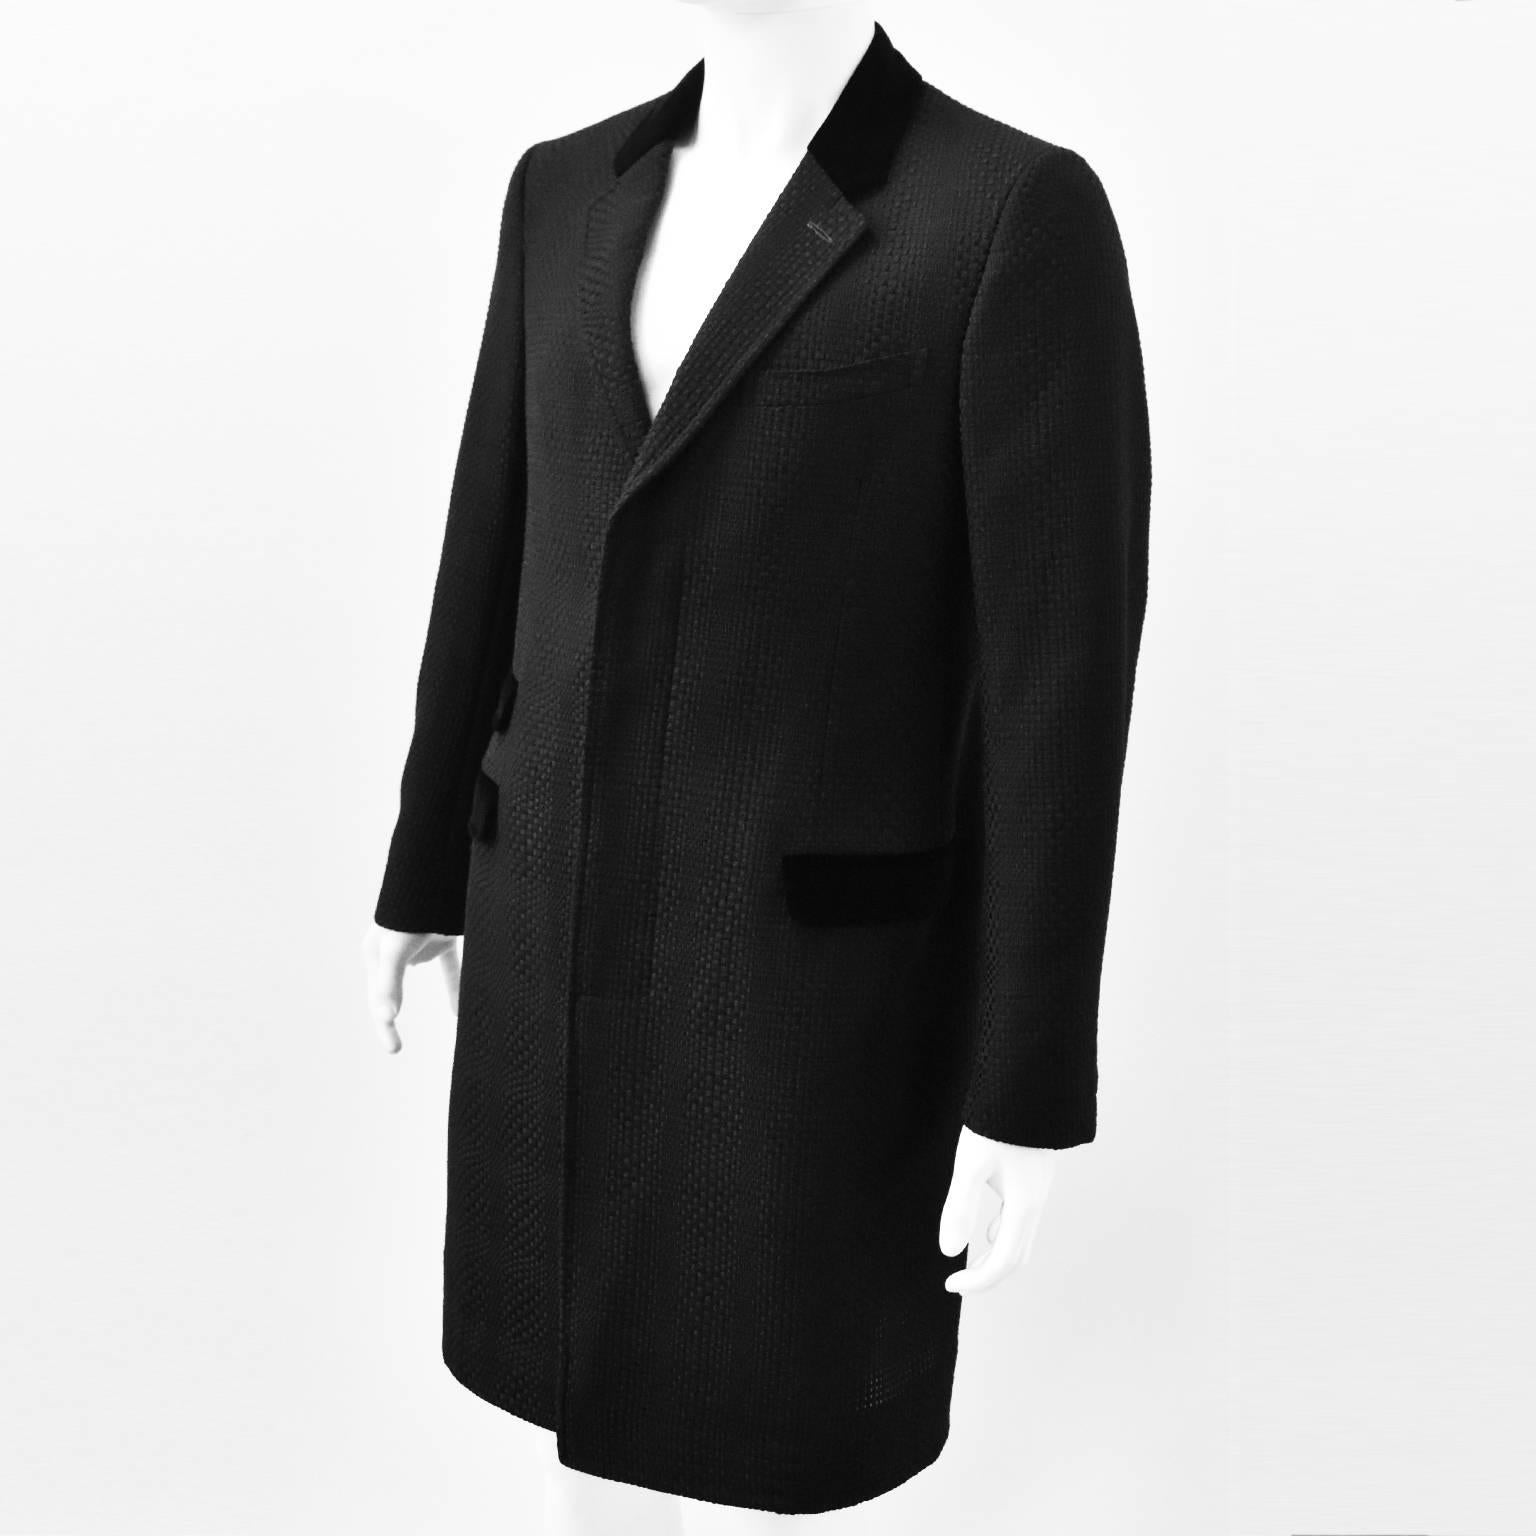 A stunning woven coat from Alexander McQueen’s Spring Summer 2016 menswear collection. The coat has an elegantly tailored shape with notched collar, concealed button fastening, slight nip in the waist and knee length. It is made from a black